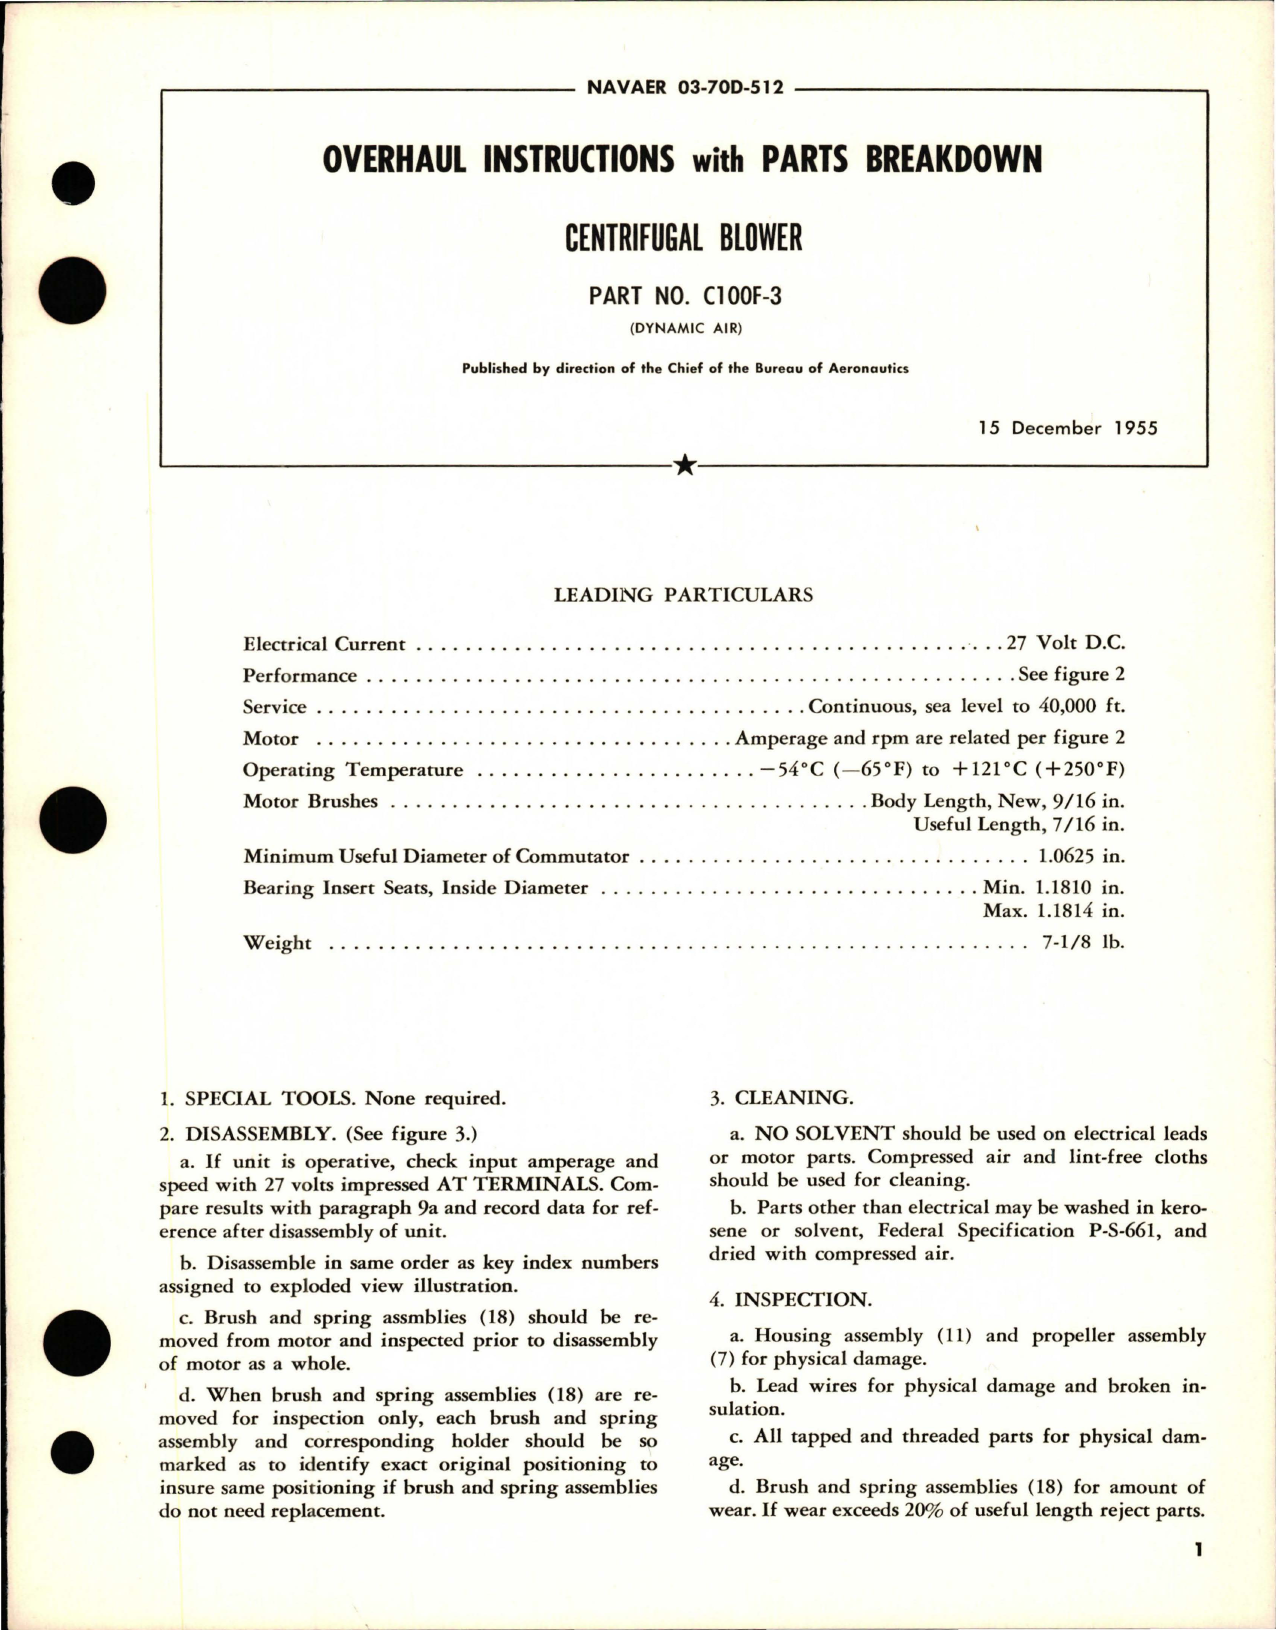 Sample page 1 from AirCorps Library document: Overhaul Instructions for Parts Breakdown for Centrifugal Blower - Part C100F-3